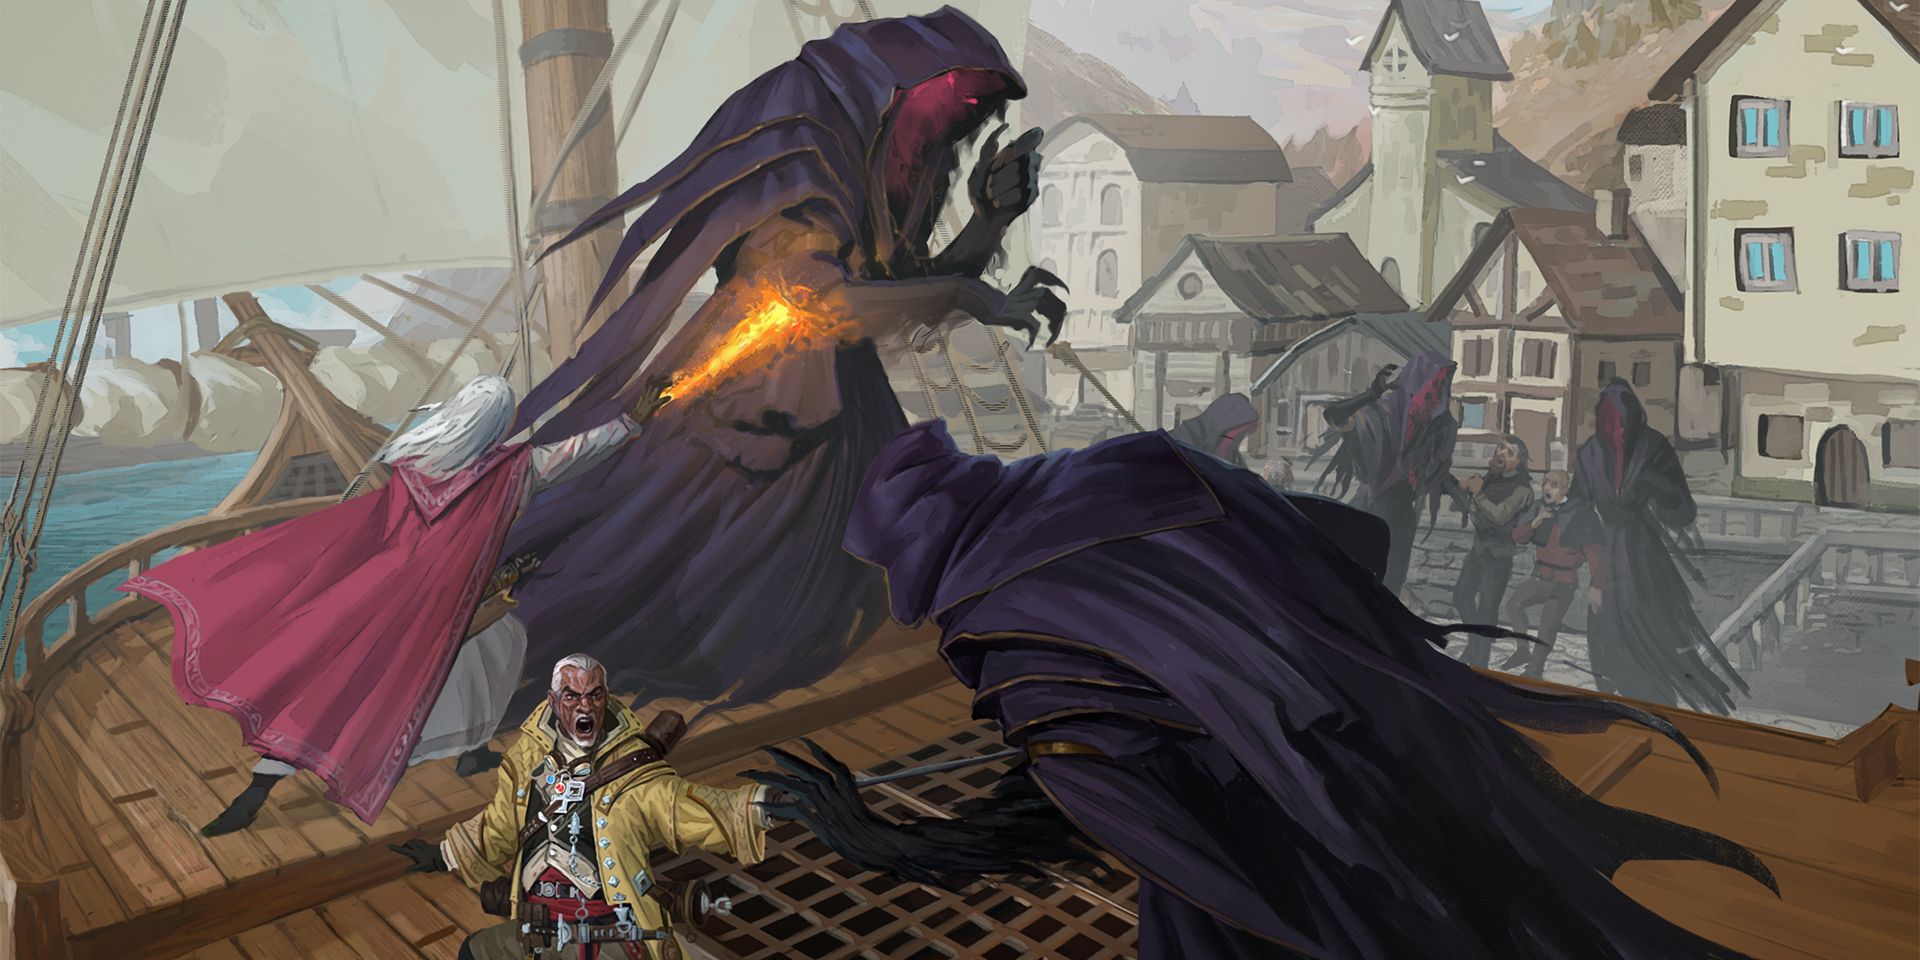 Nobles fend off cloaked creatures with glowing red eyes in the Pathfinder Adventure Path Blood Lords